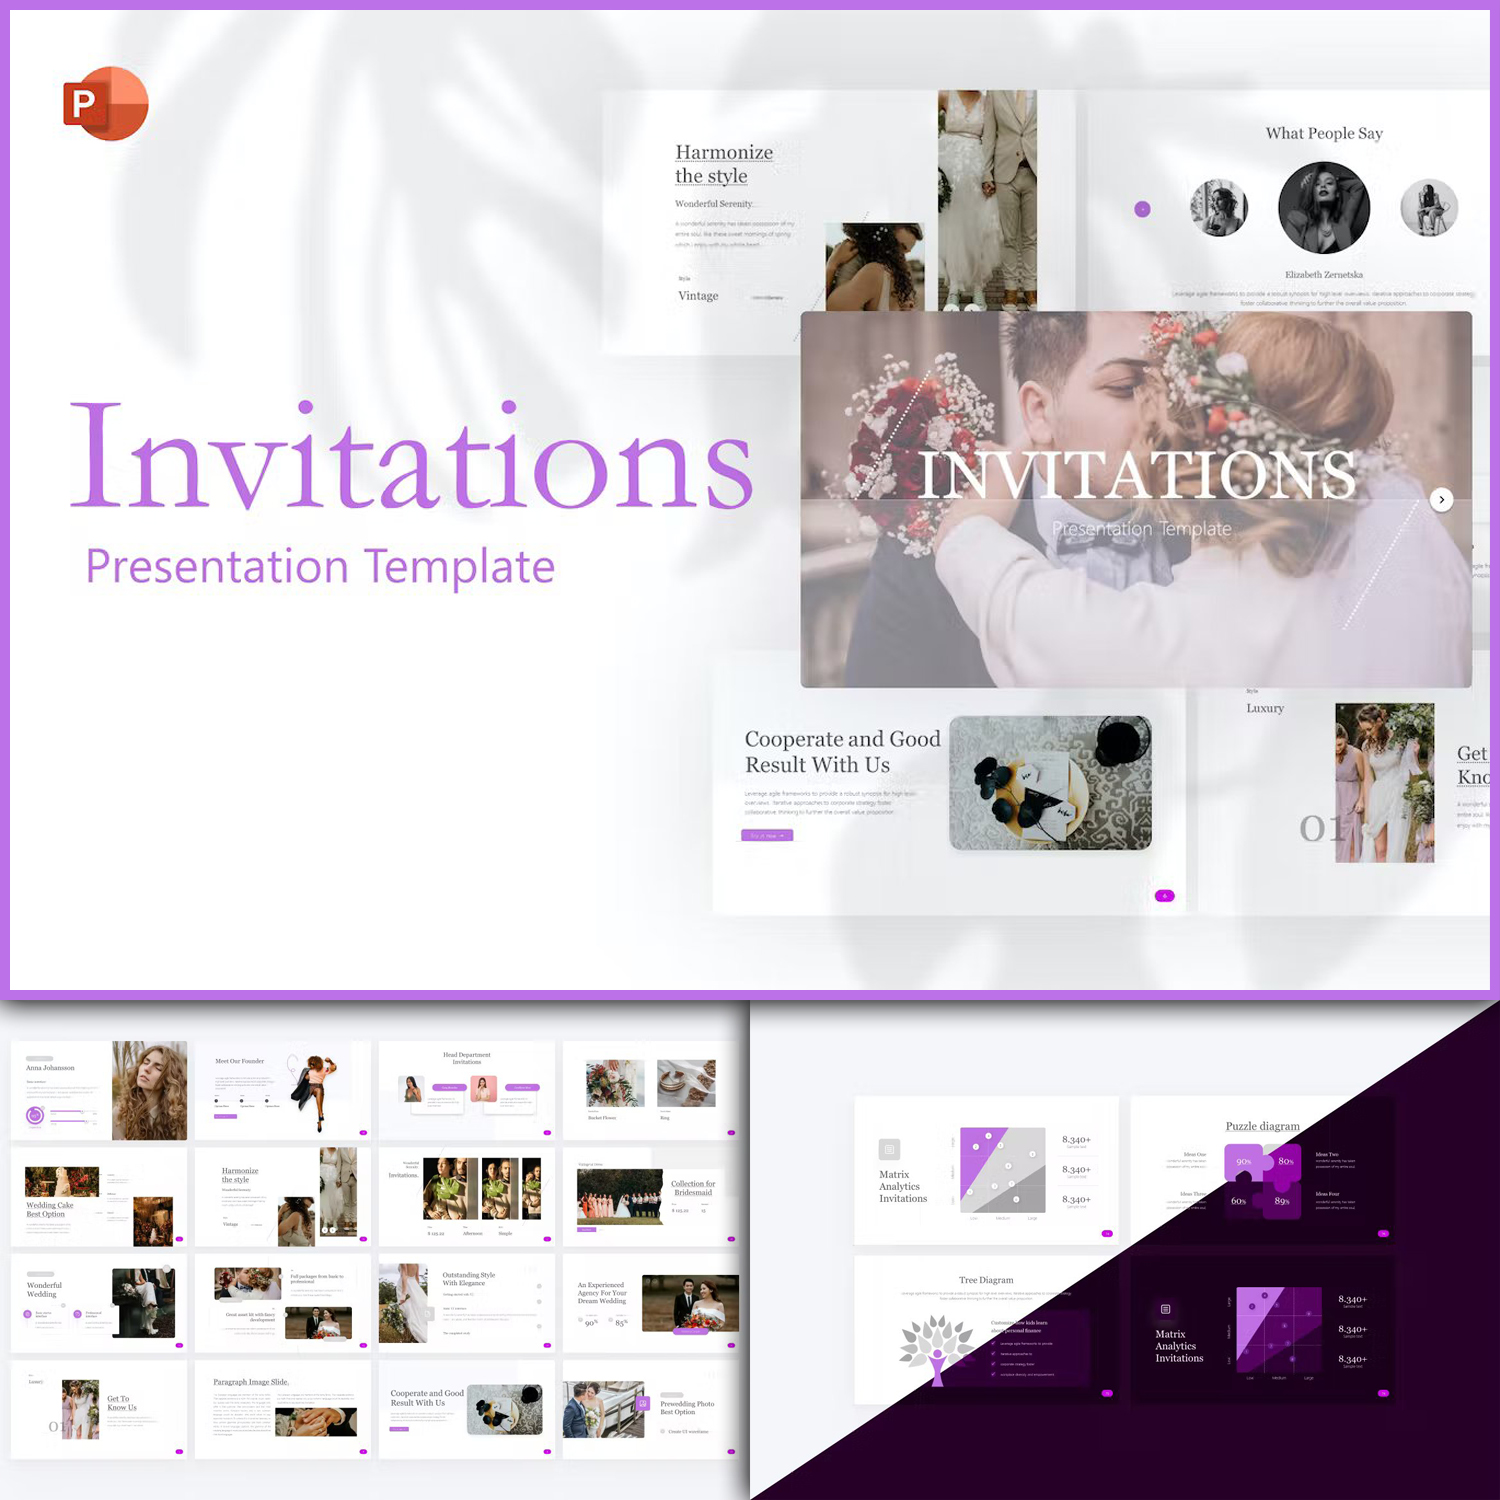 invitations simple powerpoint template b7gte8m 1500 1500 1 403